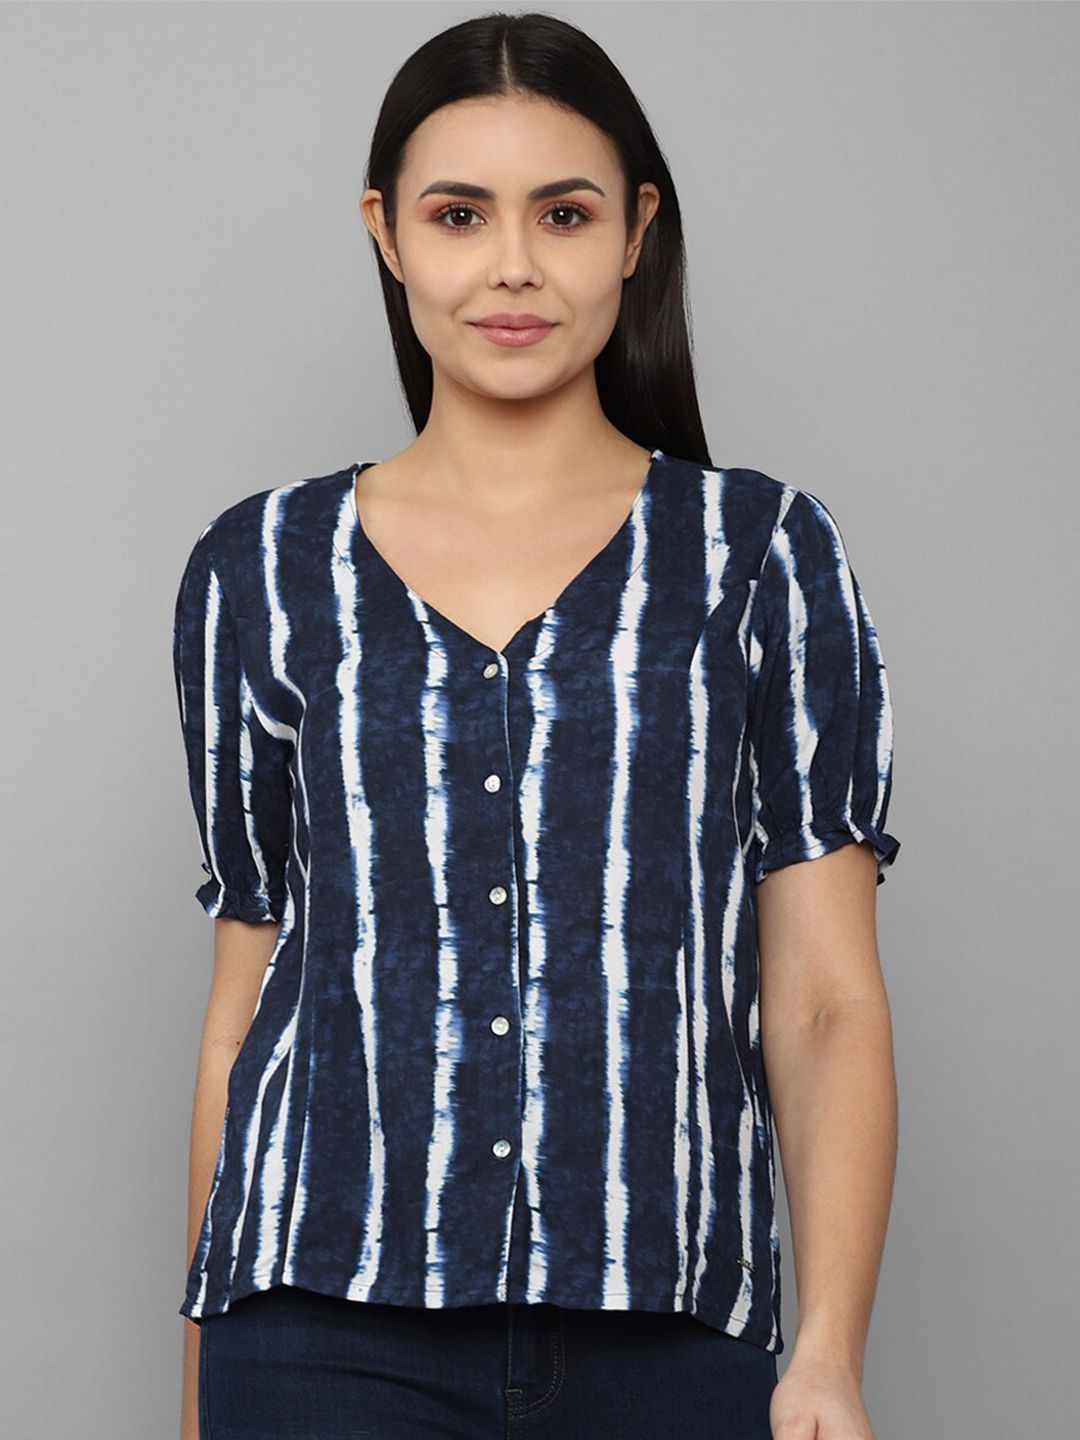 Allen Solly Woman Navy Blue & White Striped Shirt Style Top Price in India